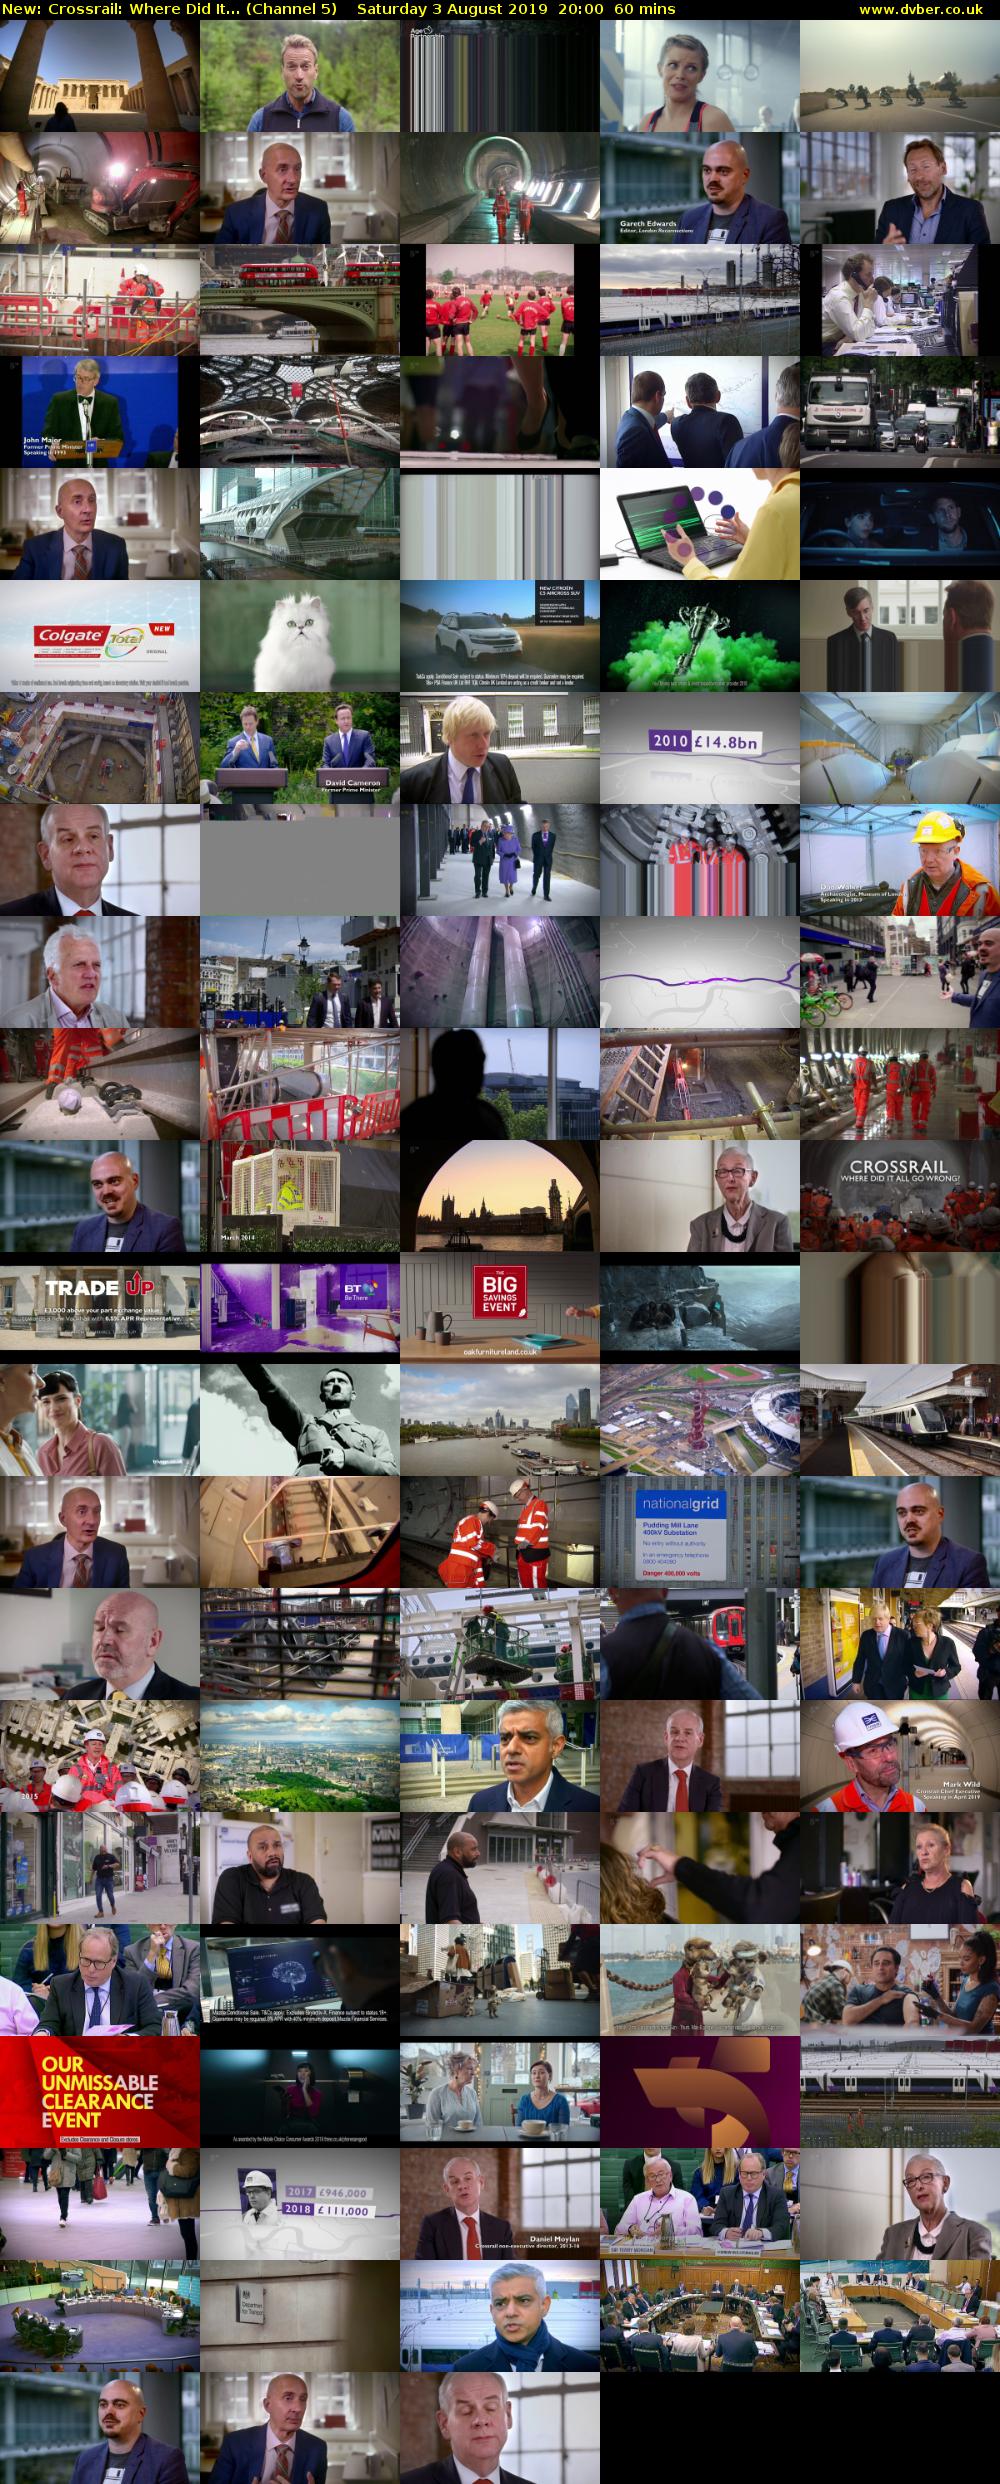 Crossrail: Where Did It... (Channel 5) Saturday 3 August 2019 20:00 - 21:00